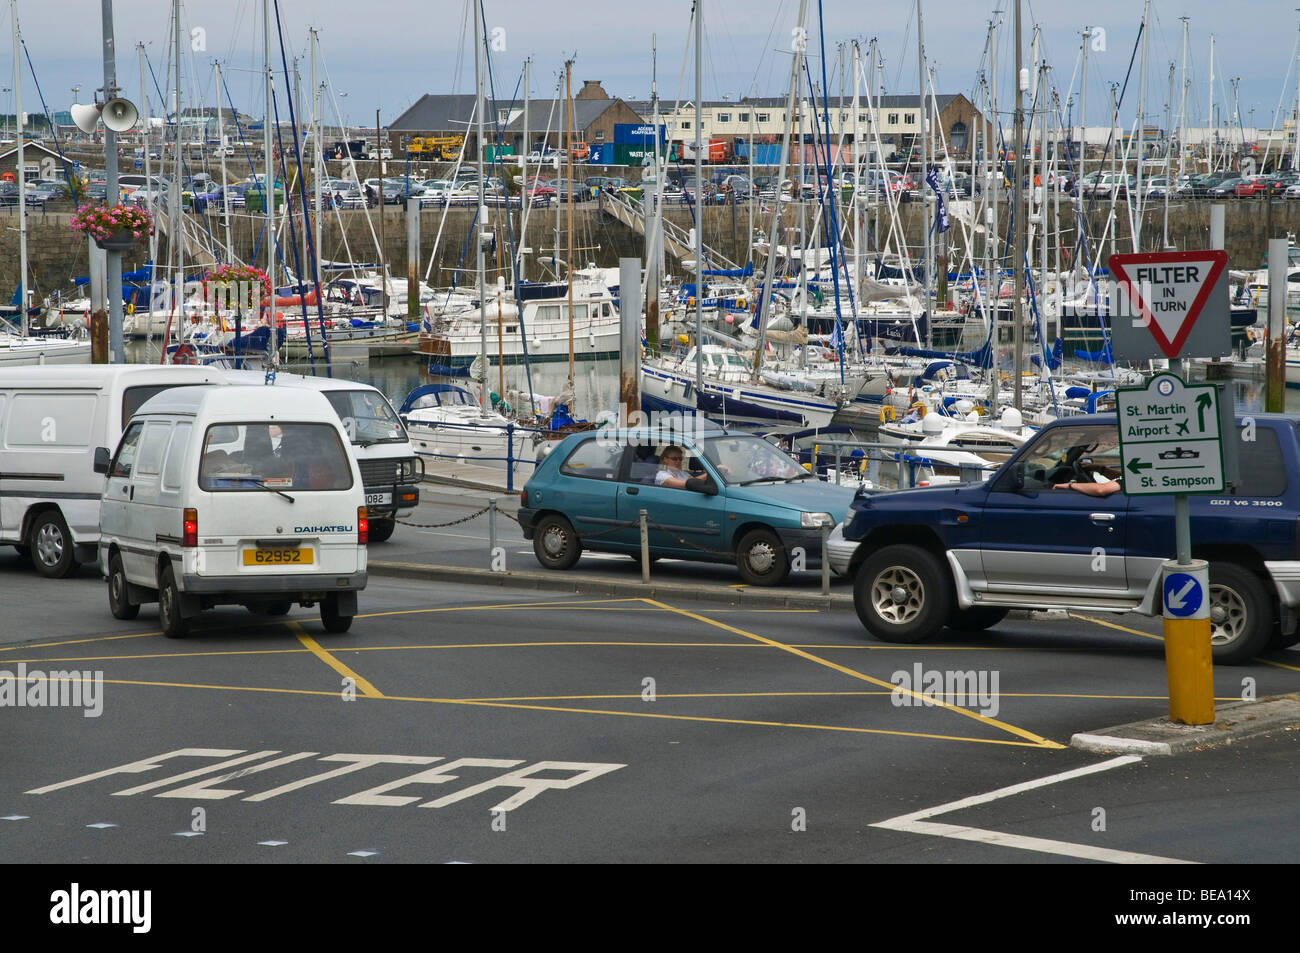 dh  ST PETER PORT GUERNSEY Cars in filter box system and road Filter signpost motor traffic channel islands intersection Stock Photo